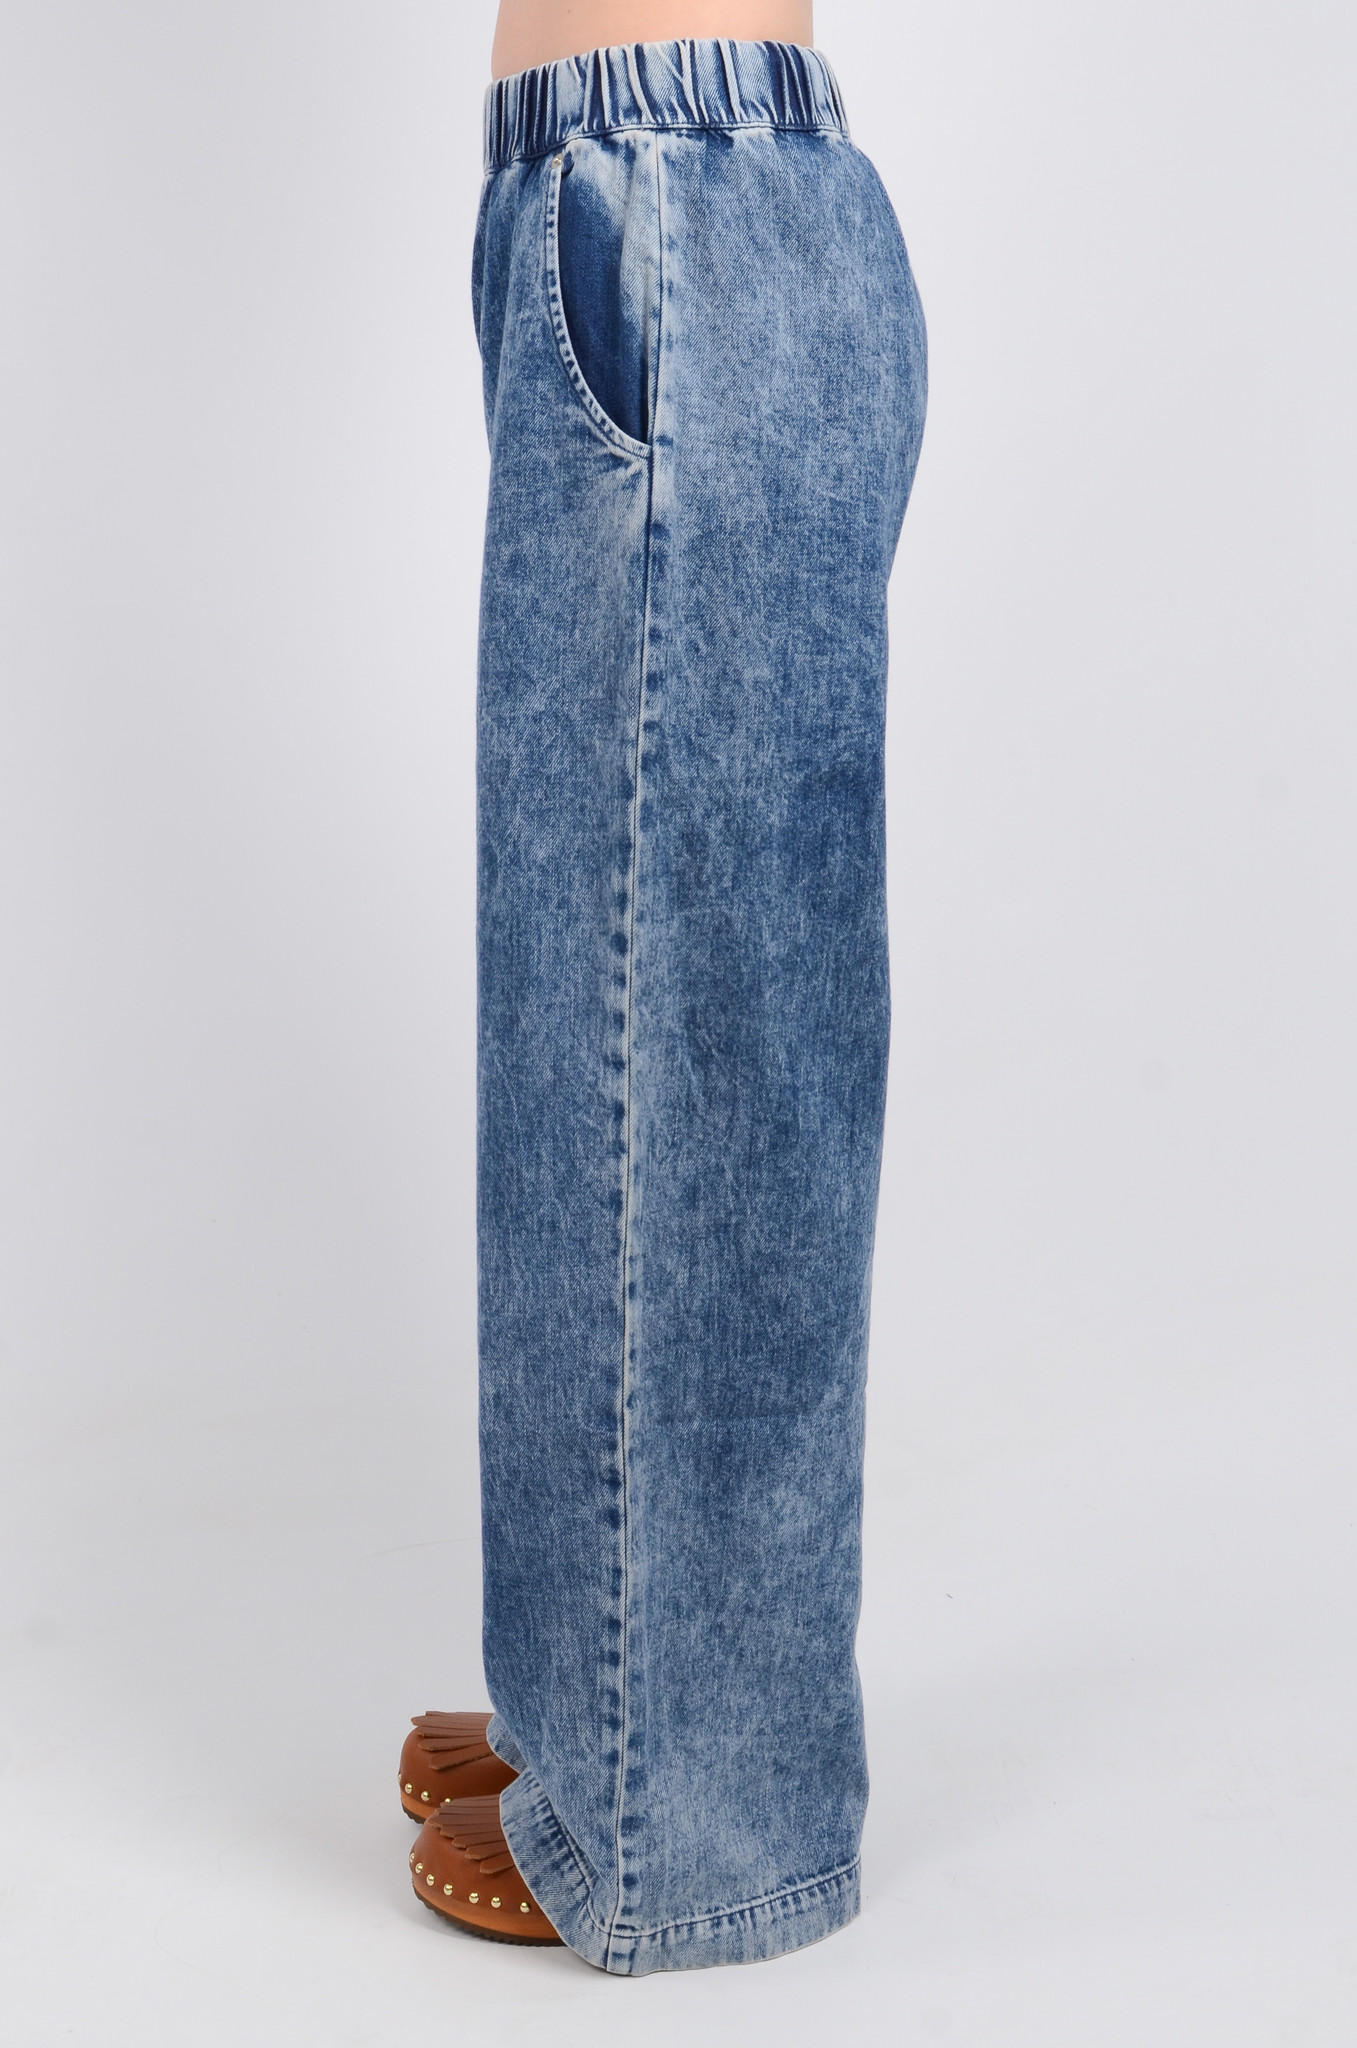 Polly Jeans in Blue Wash-5